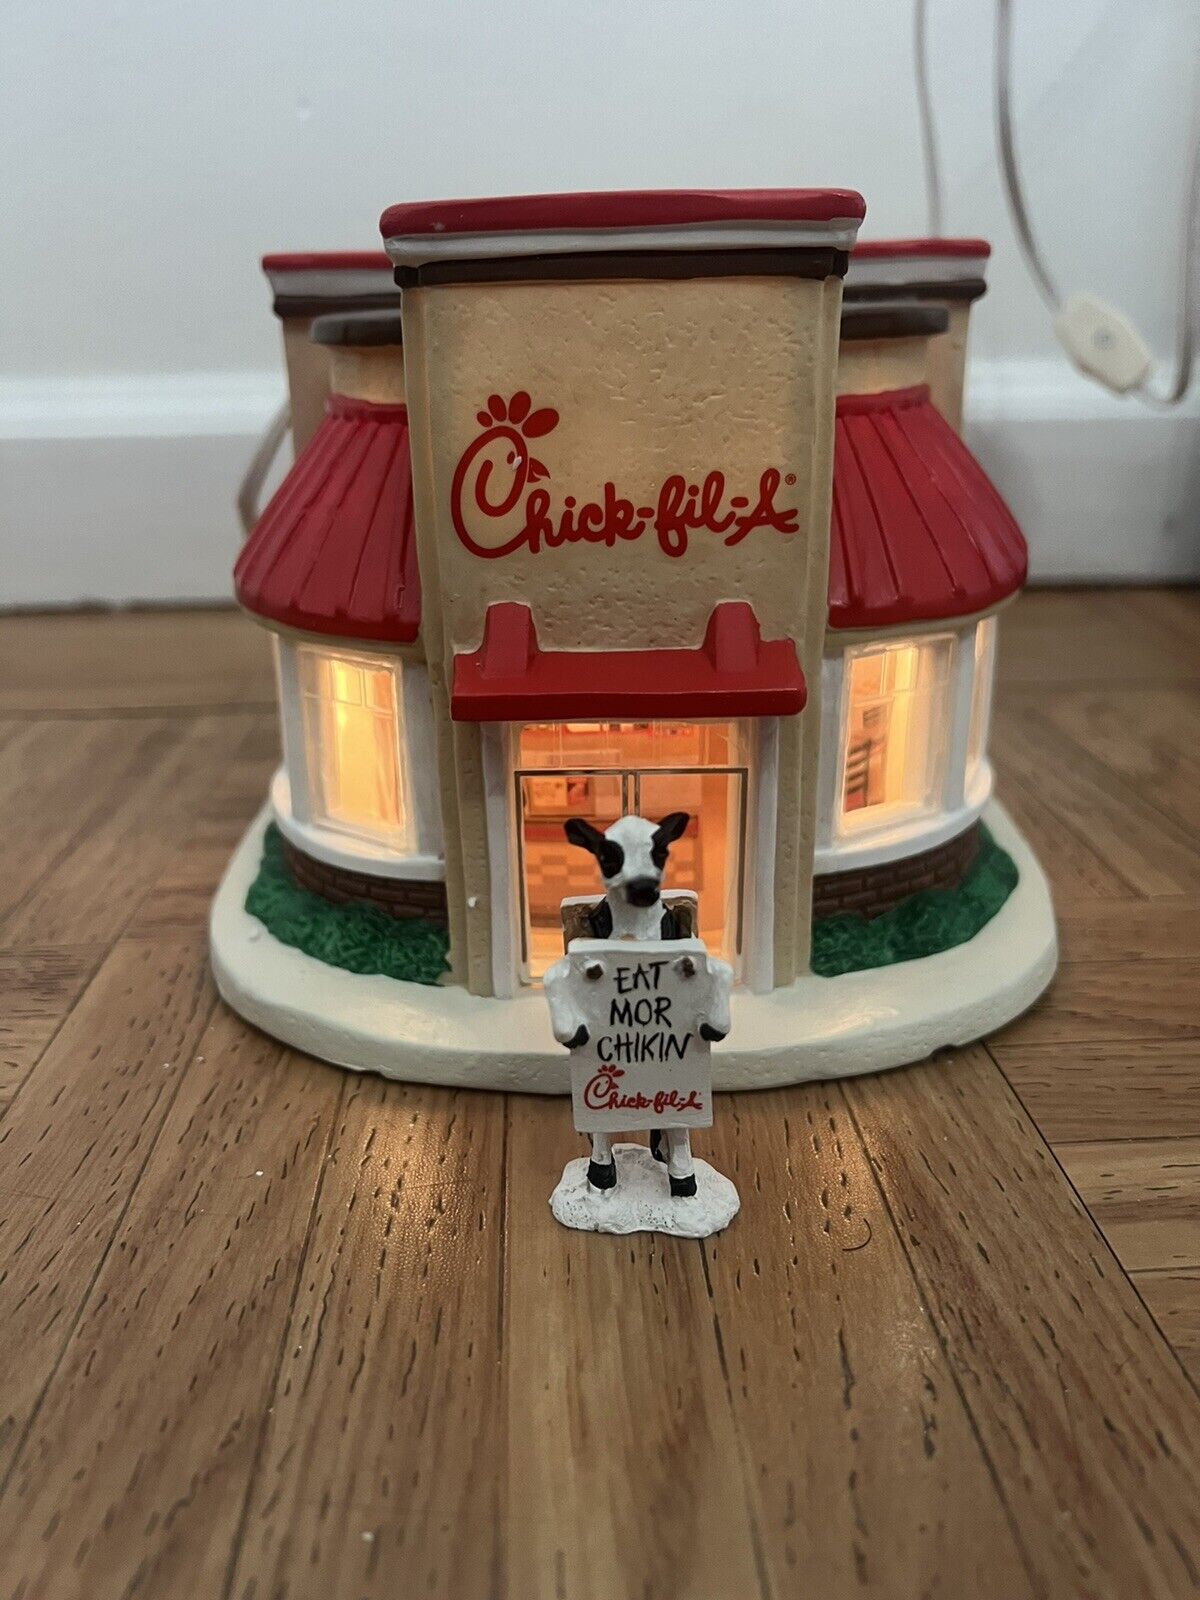 2011 Santa's Best Chick-fil-A Porcelain Illuminated Village in Box: Includes Cow